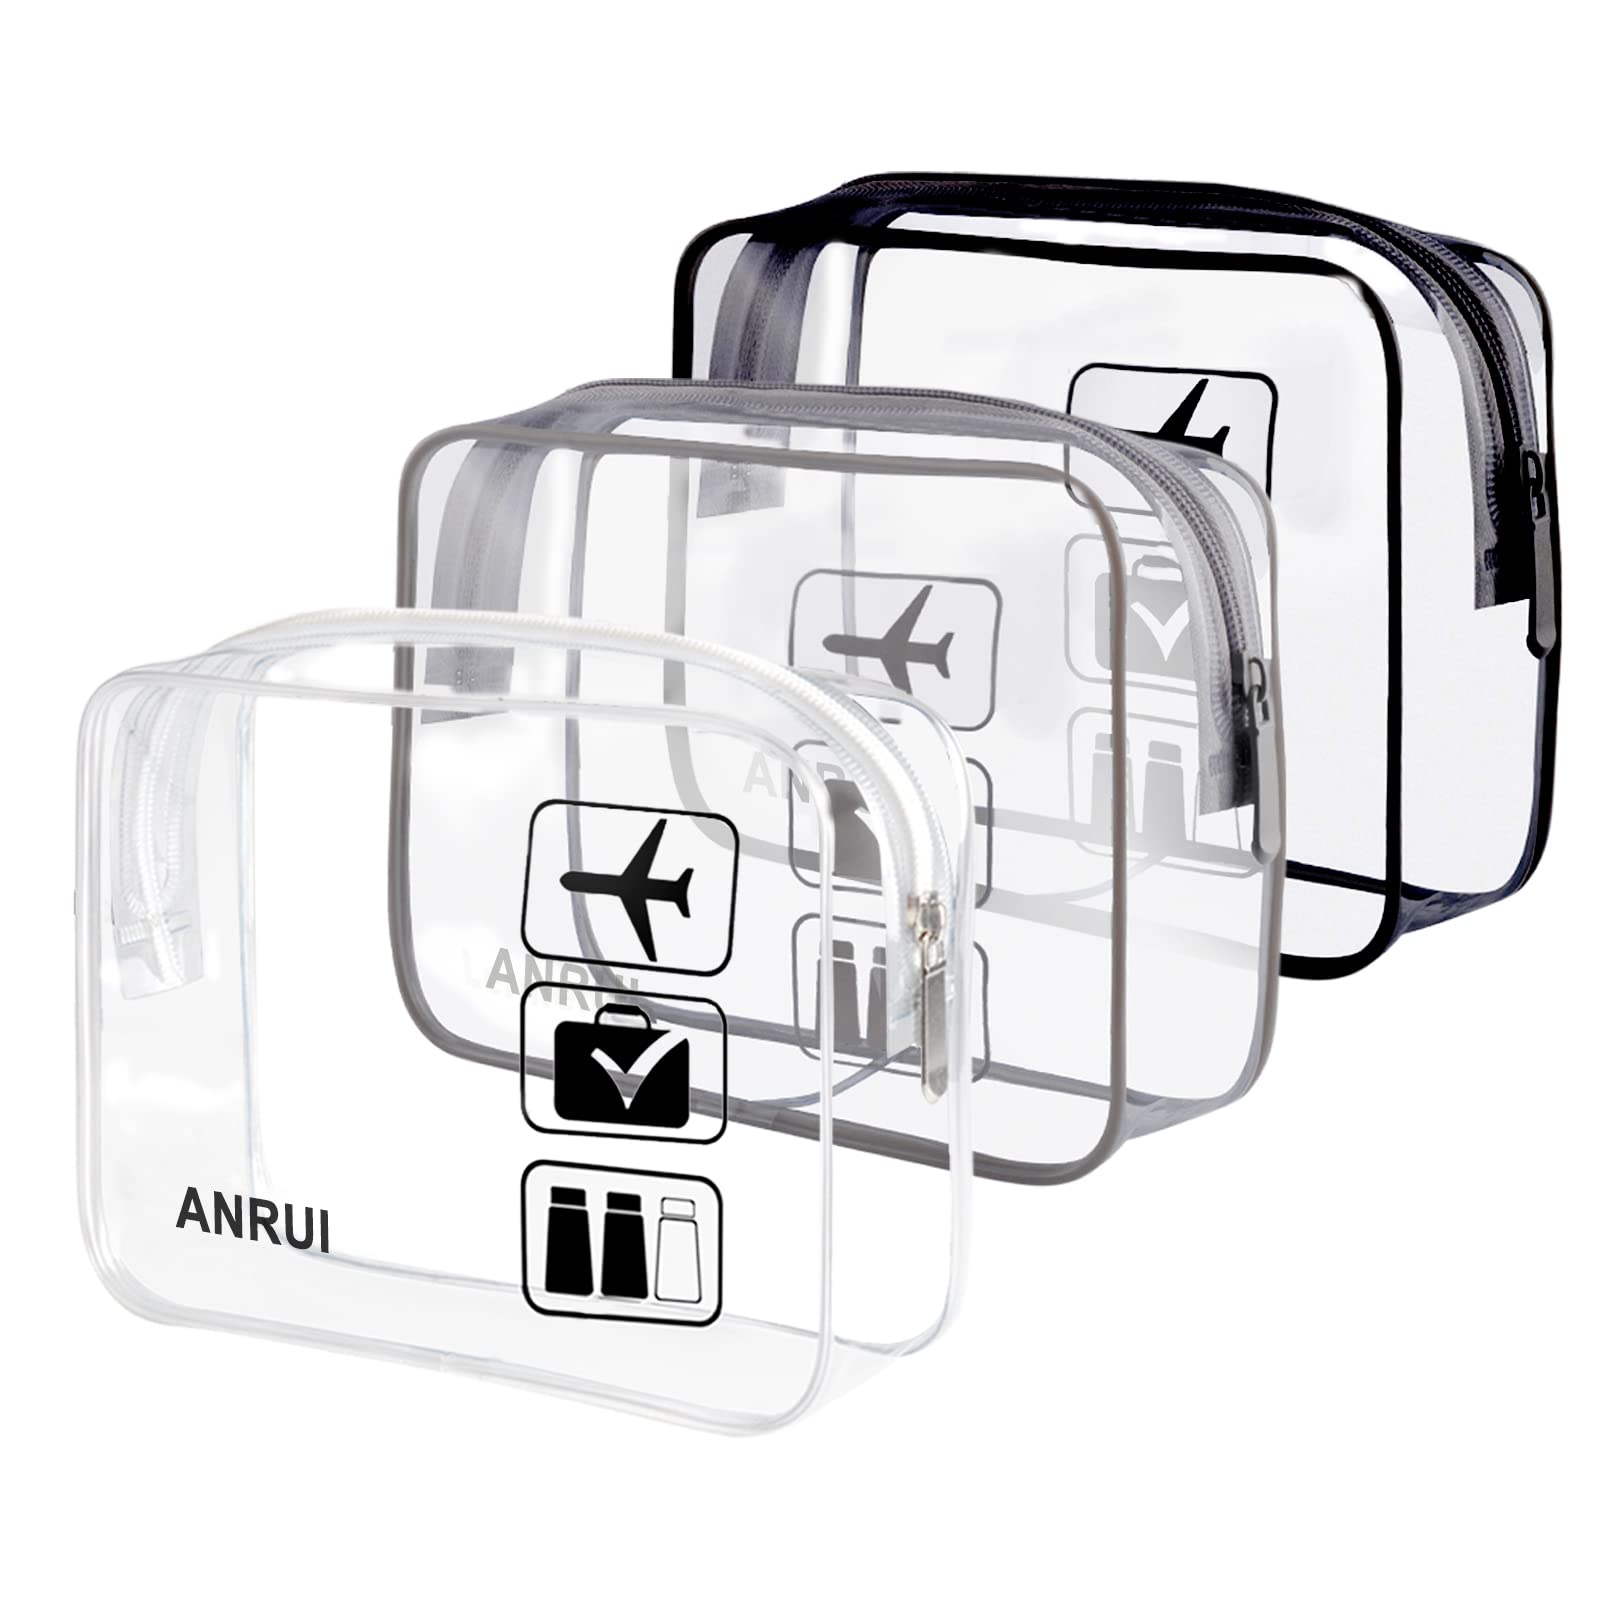 Clear Travel Toiletry Bag, Airport Security Approved Liquids Bags